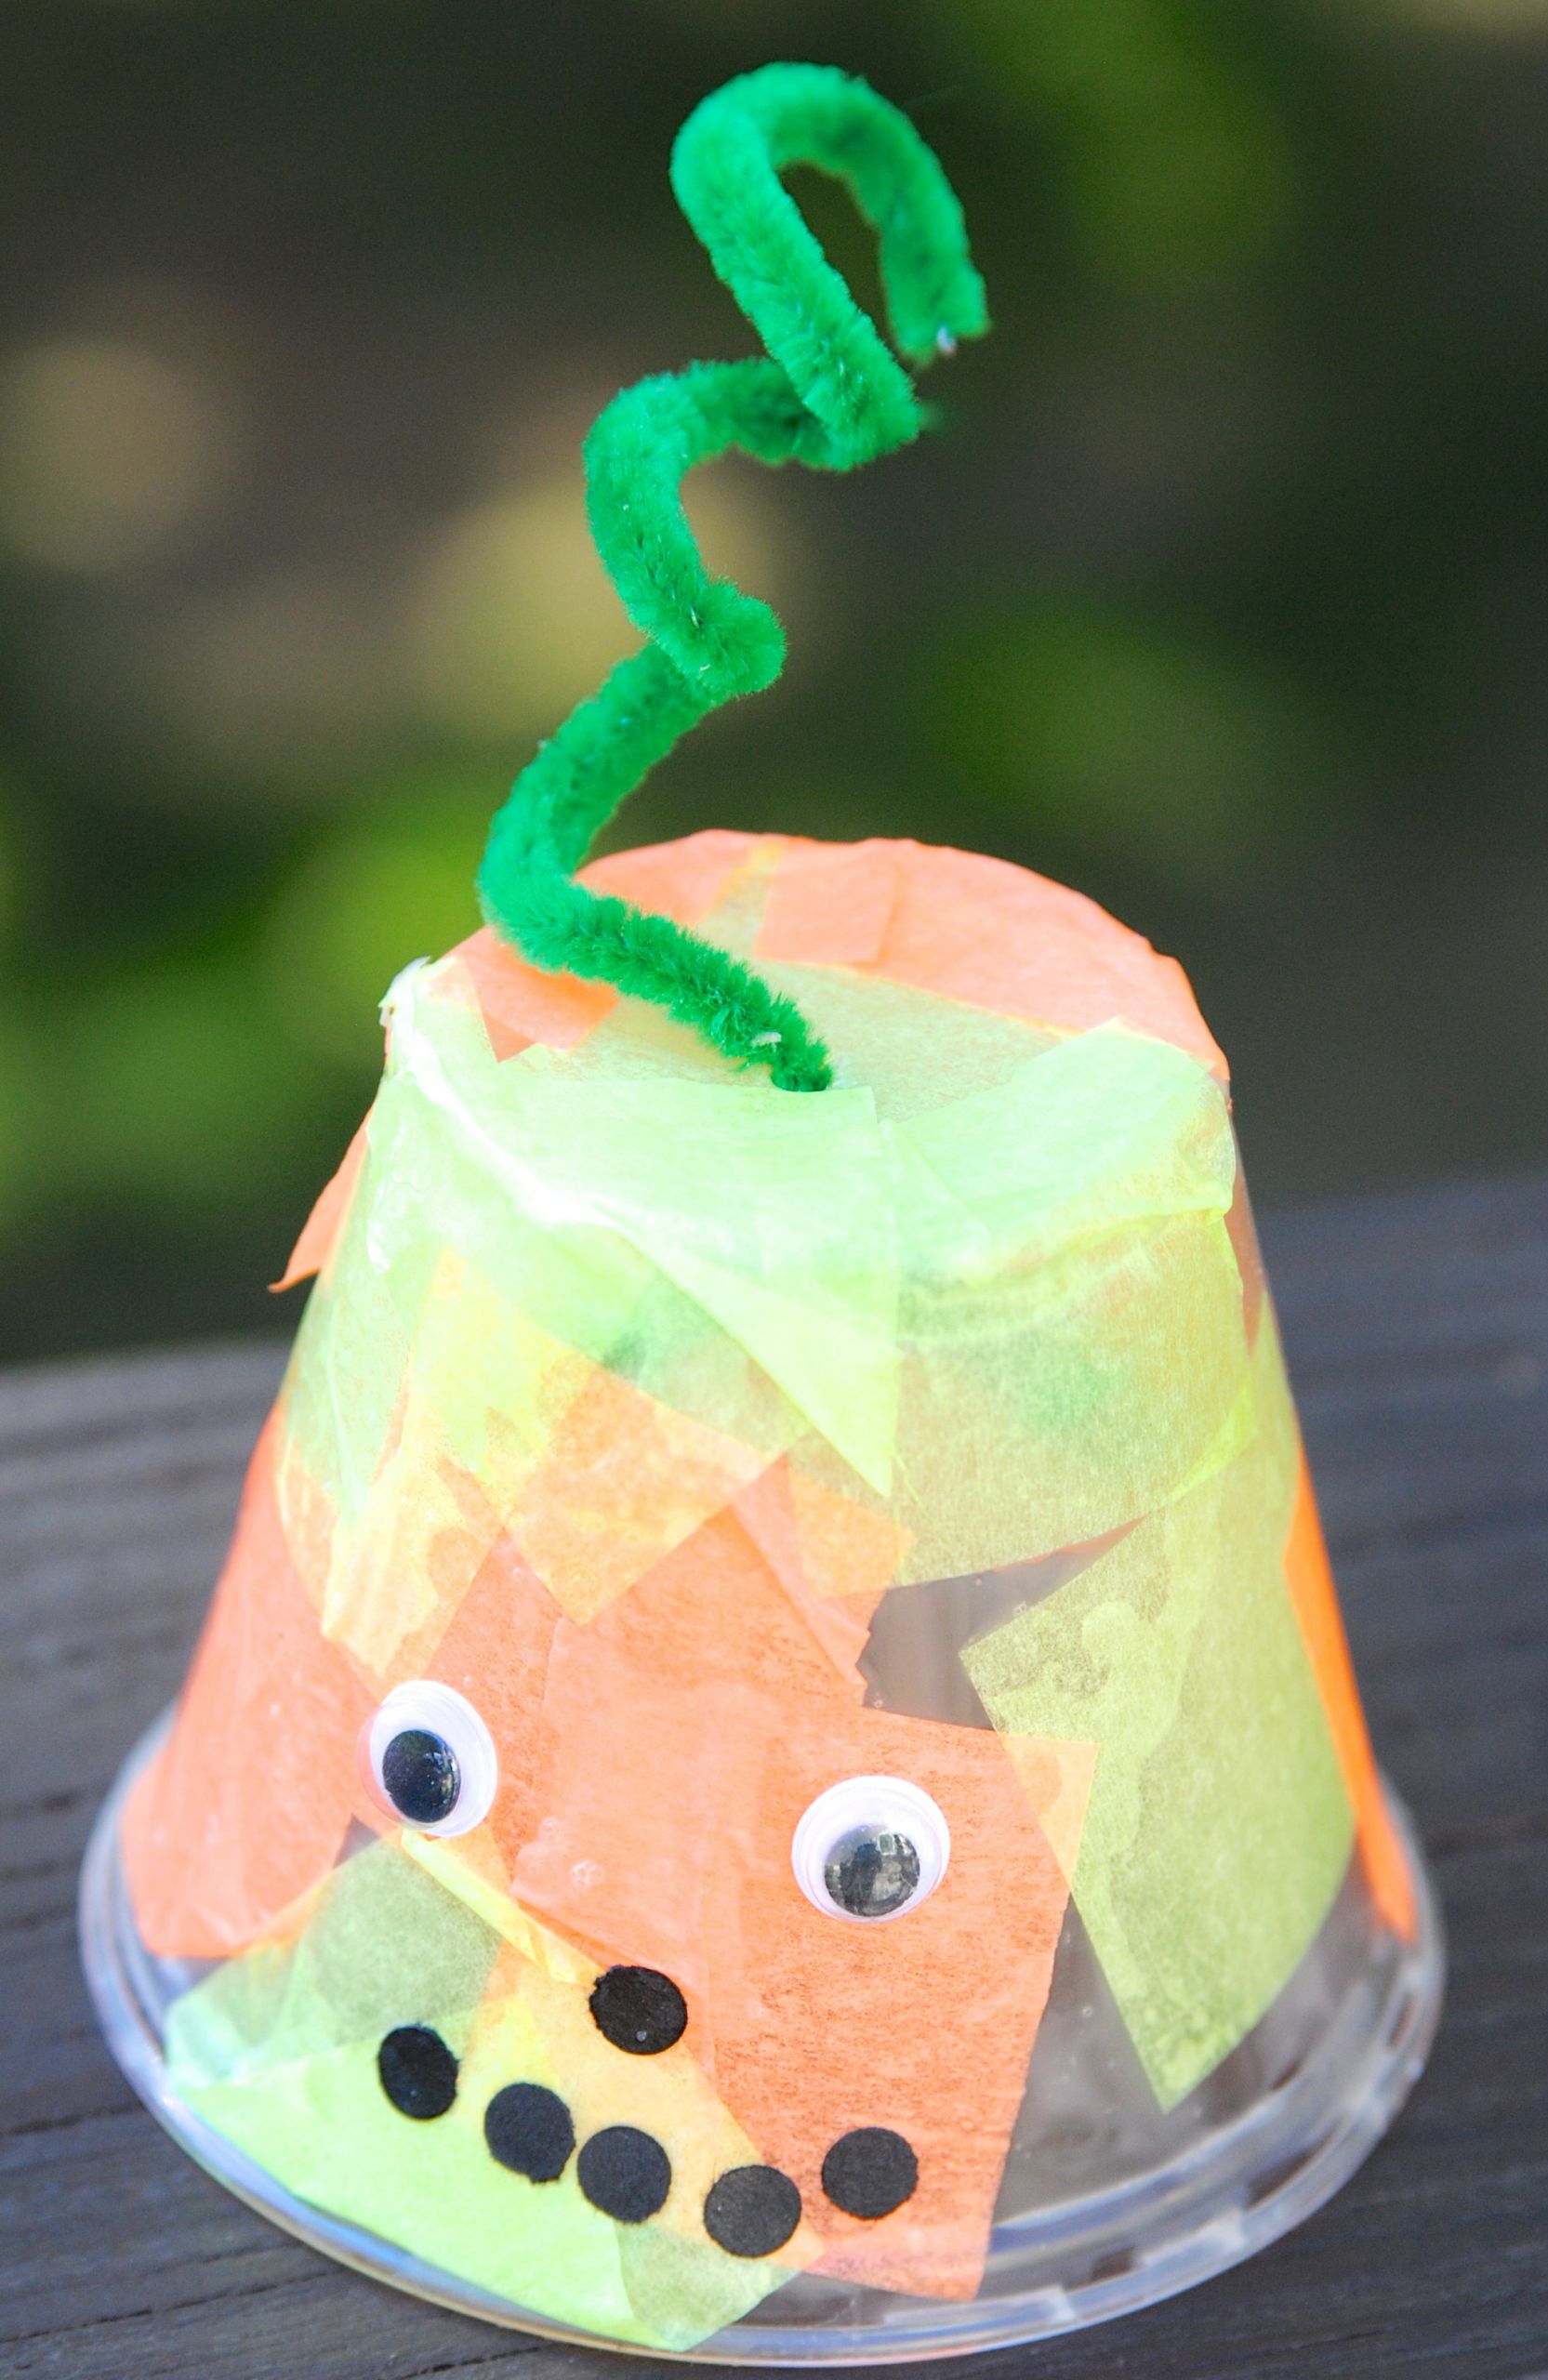 Fun Craft Ideas For Toddlers
 Cute and Quick Halloween Crafts for Kids